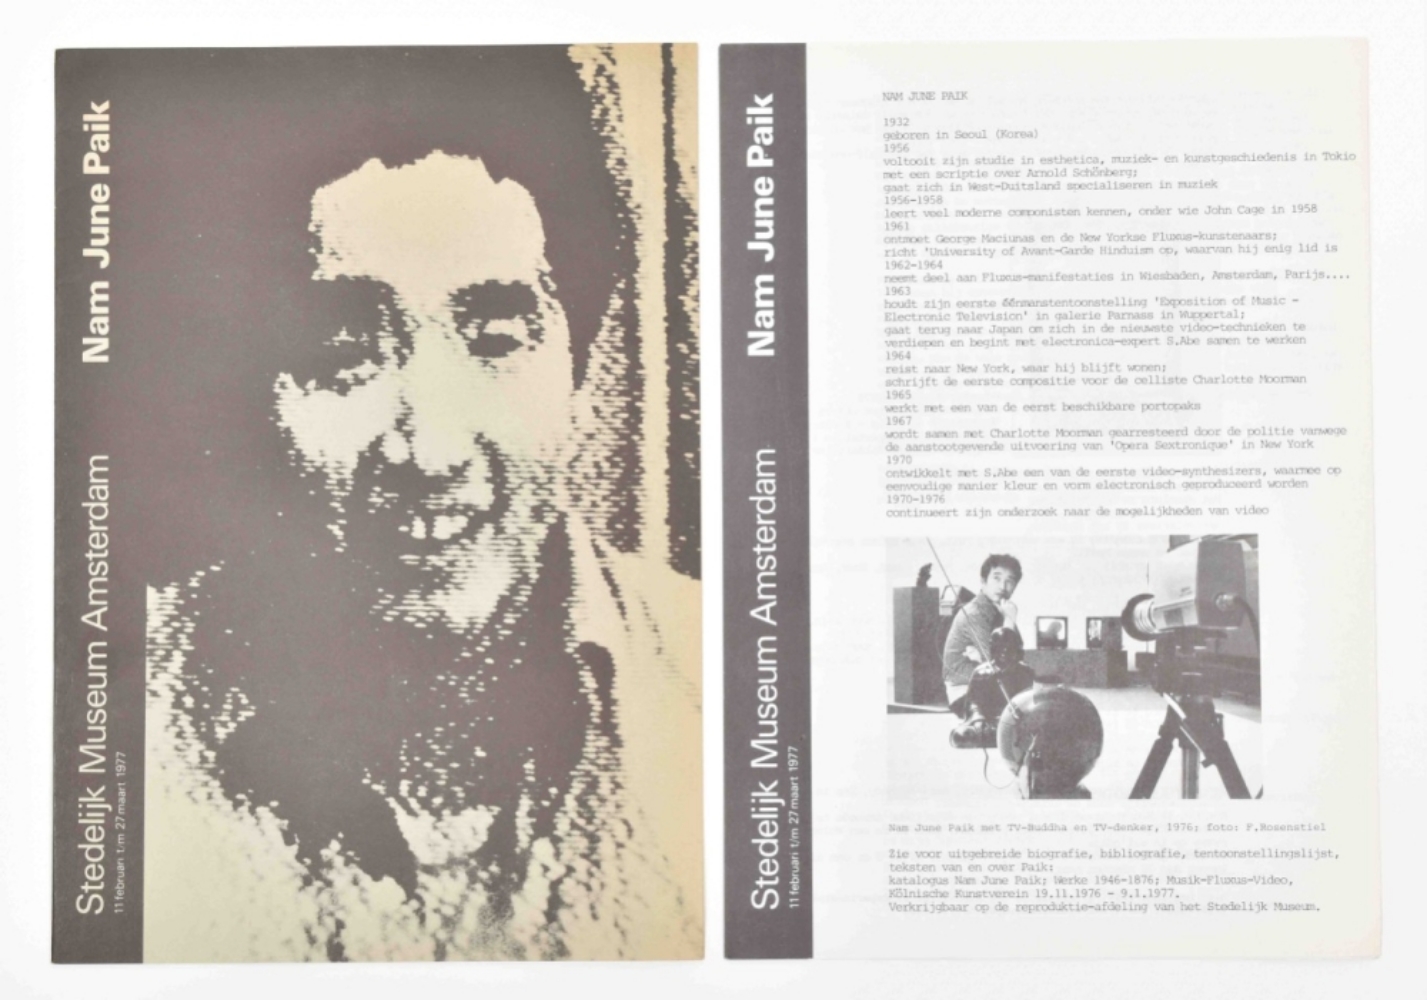 Nam June Paik ephemera from the collection of Dorine Mignot and Wim Beeren - Image 7 of 9